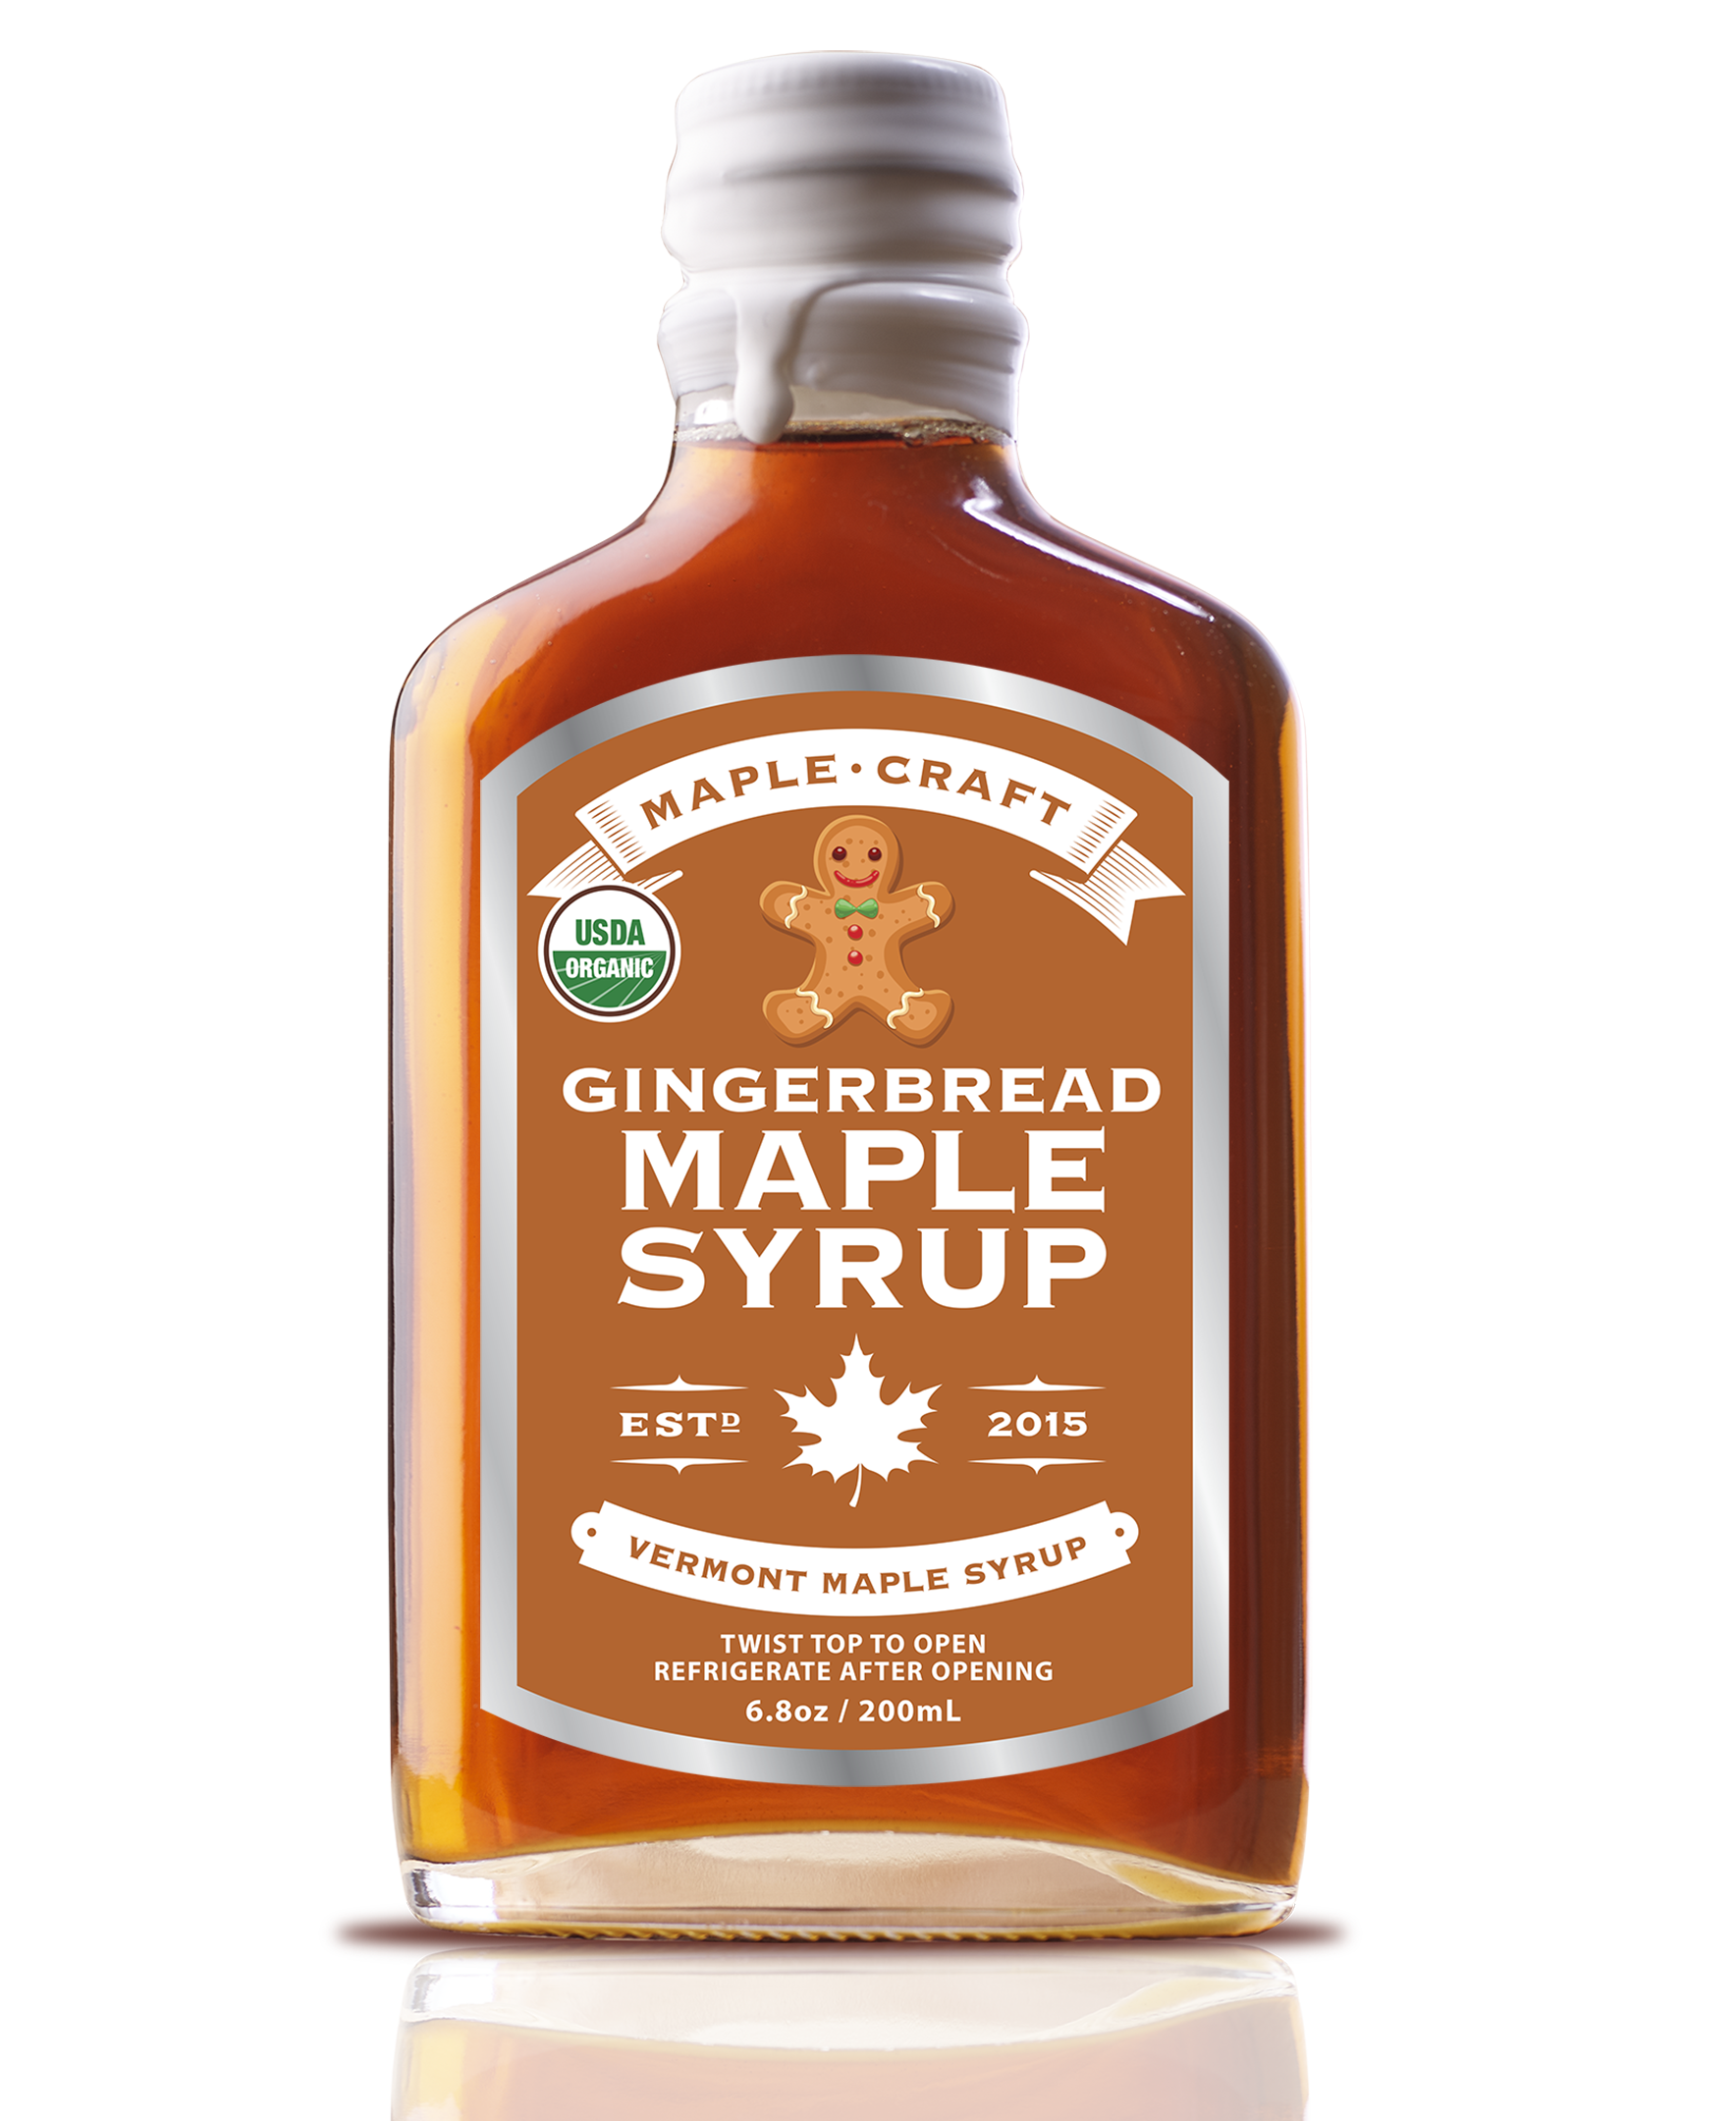 Gingerbread Maple Craft Syrup (Organic)